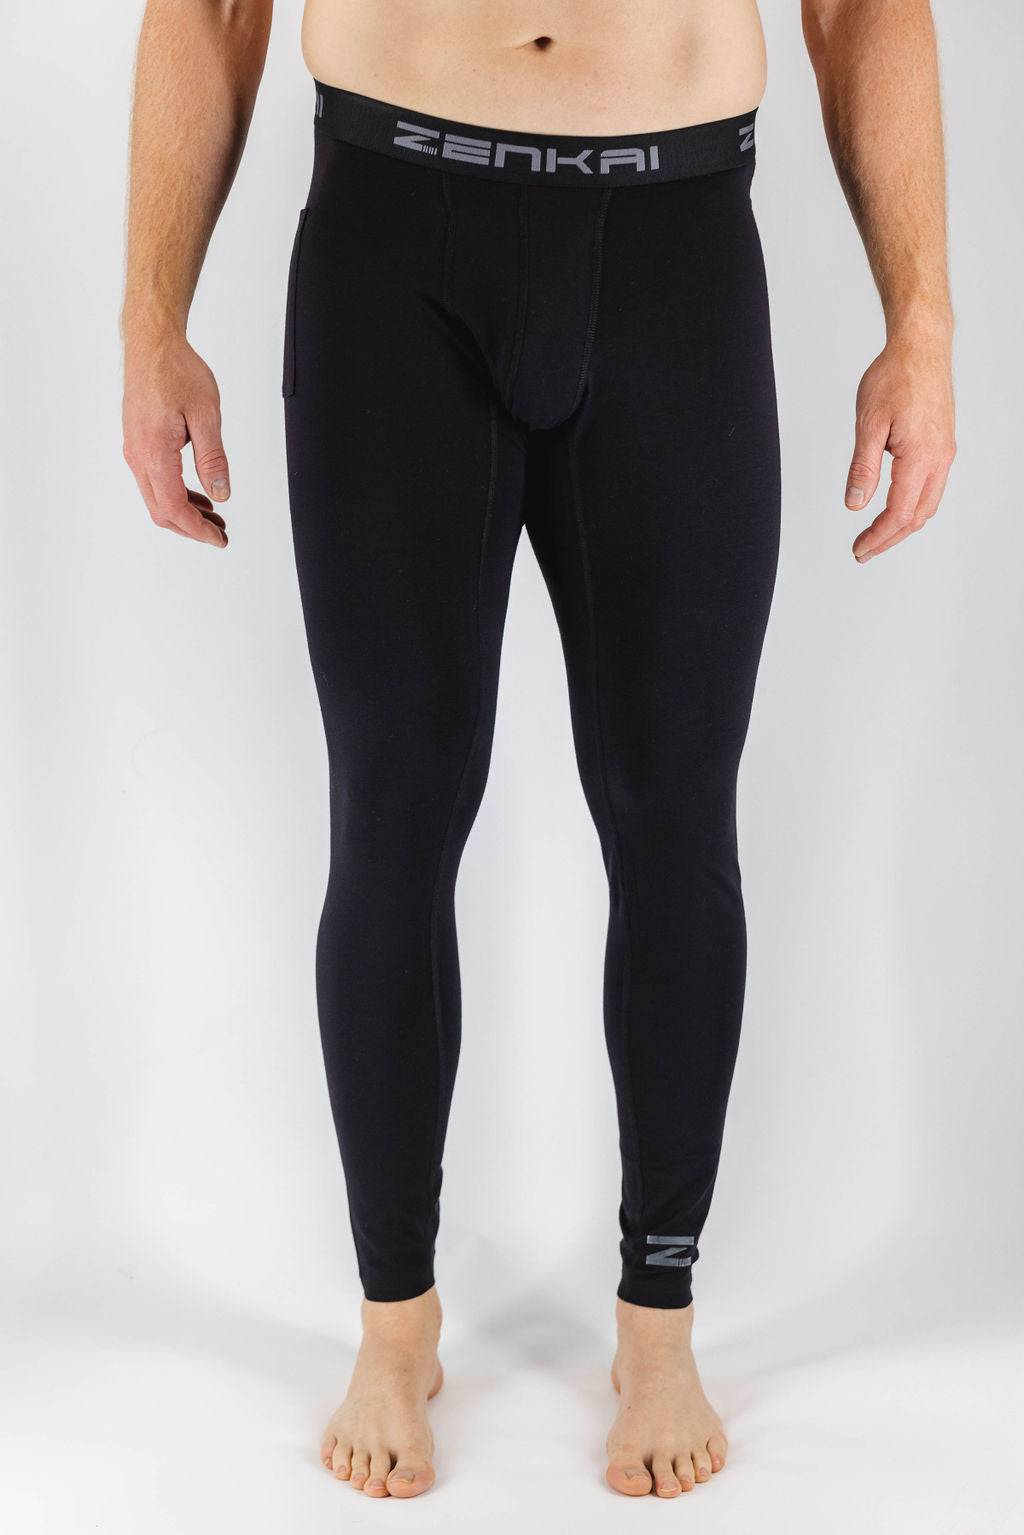 ZEROPOINT ATHLETIC COMPRESSION TIGHTS MEN BLACK WHITE CHARTREUSE